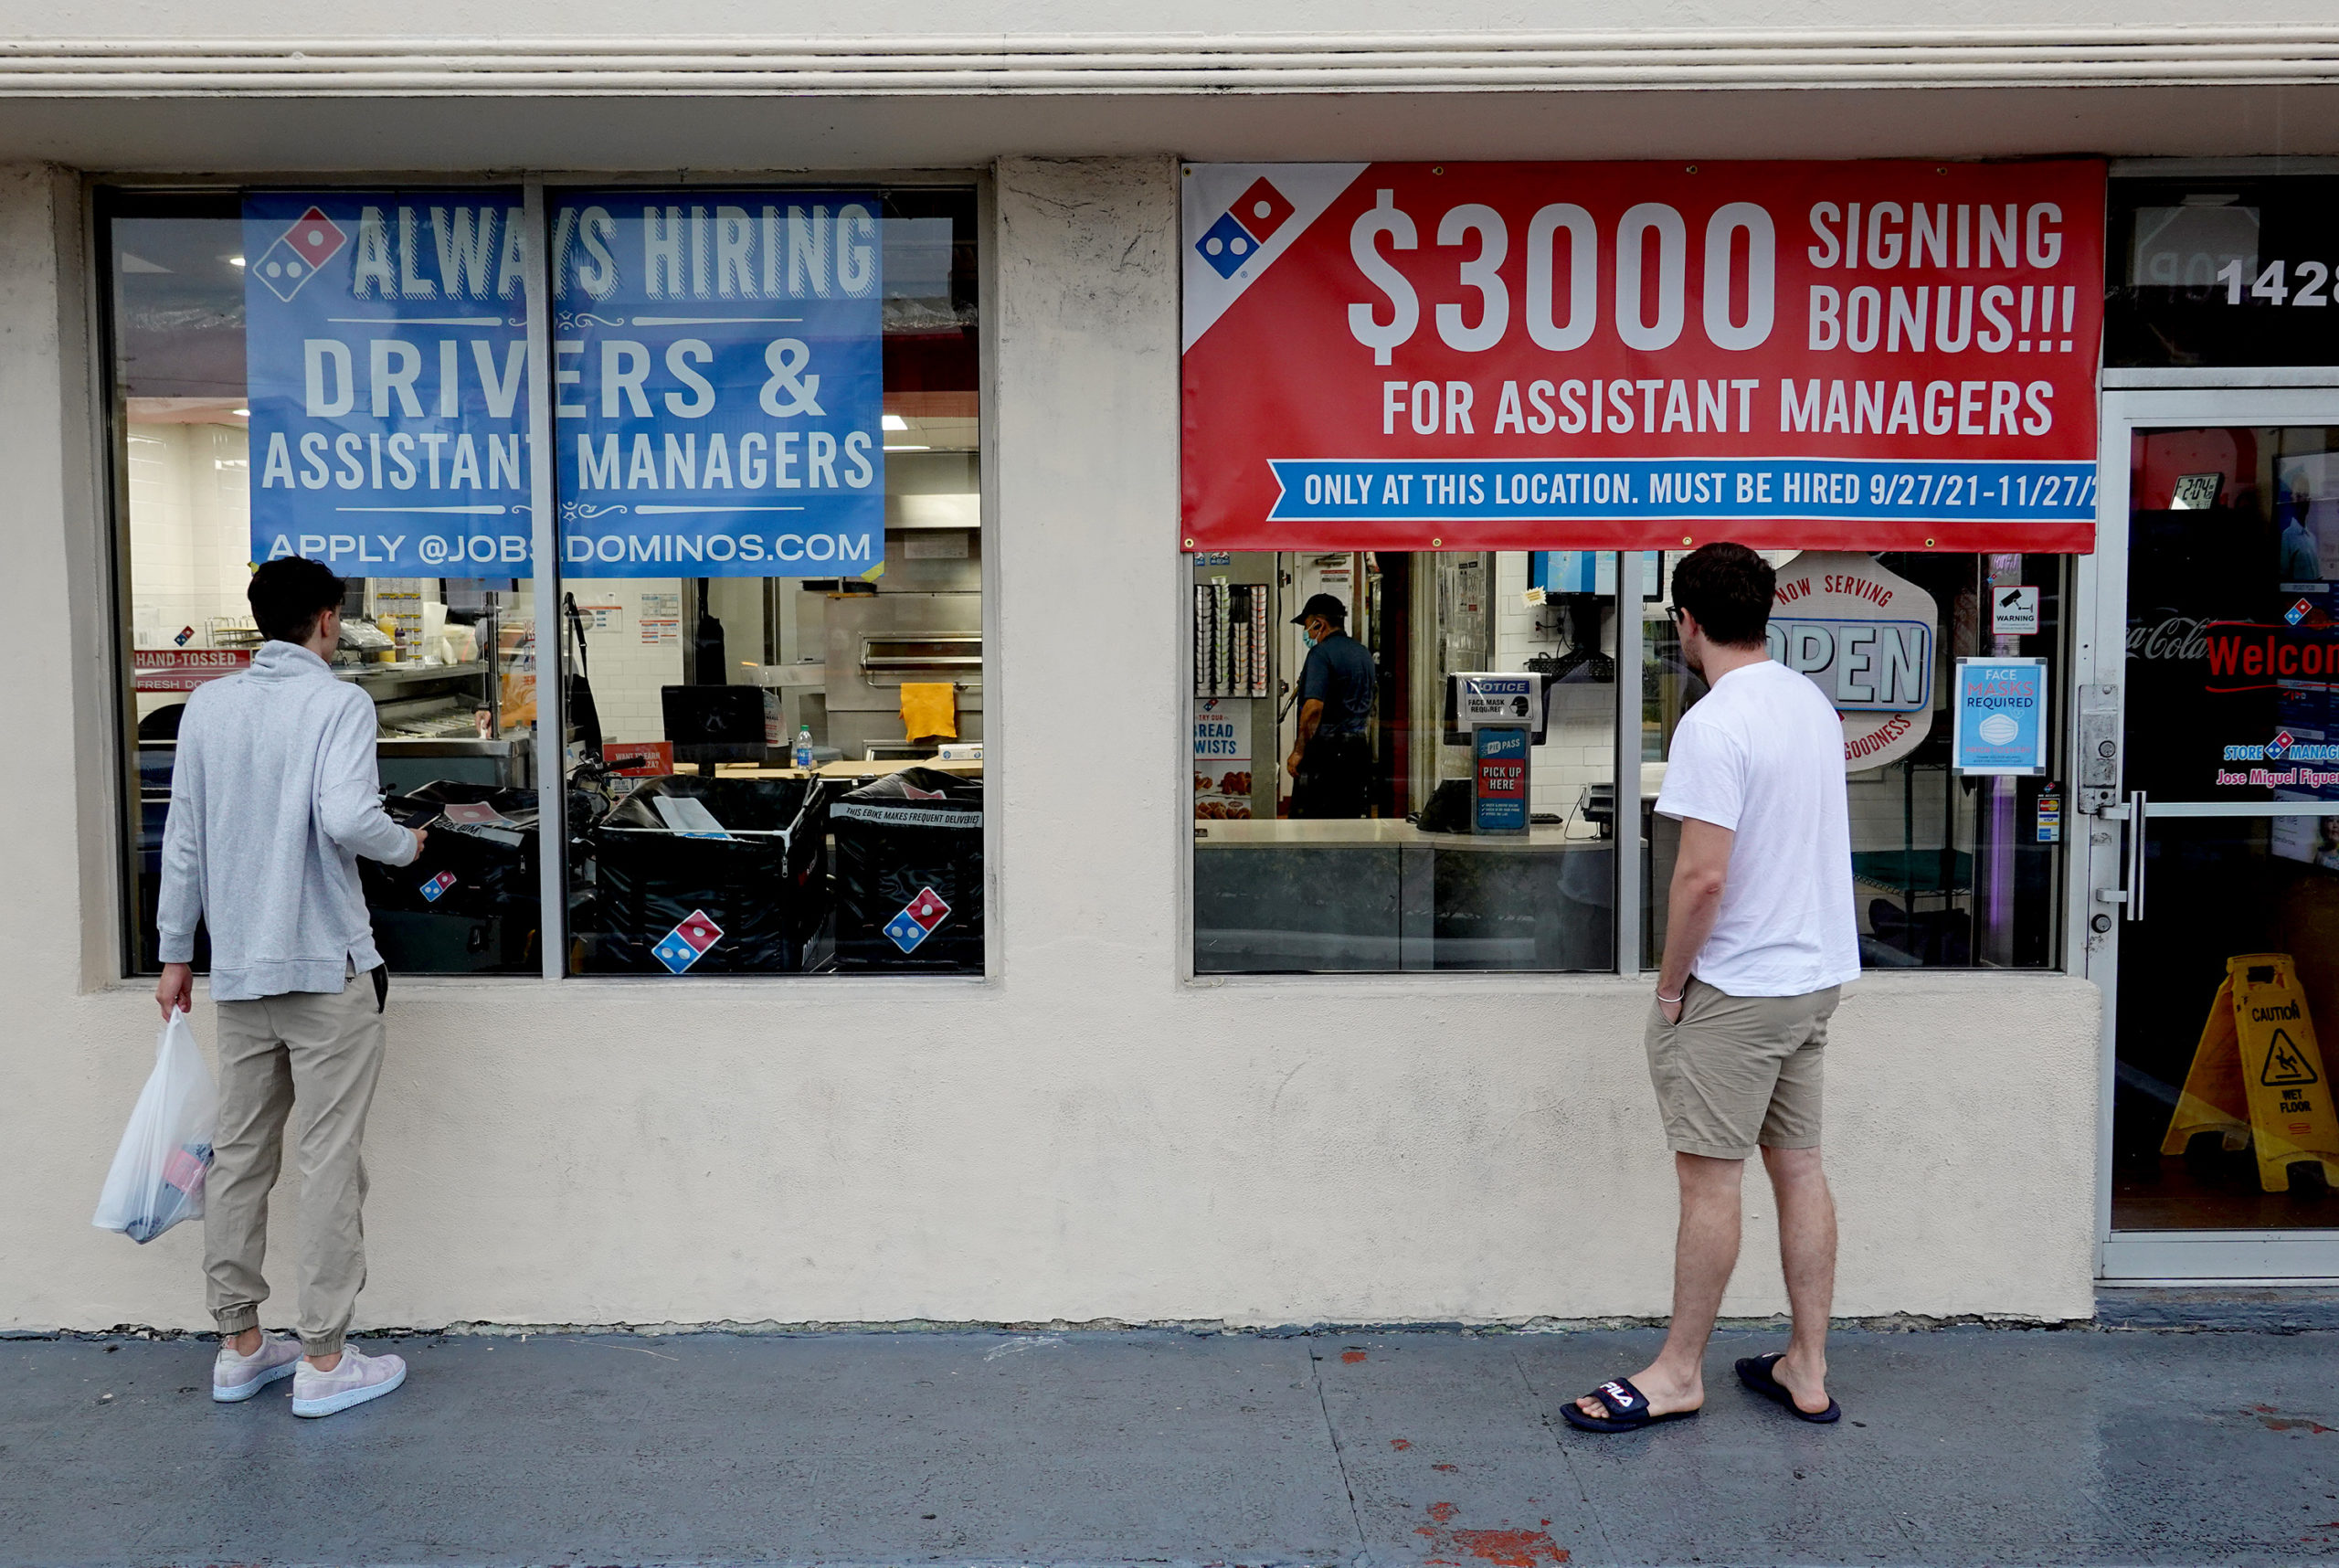 A Dominos restaurant posts signs advertising job openings in Miami Beach, Florida. (Joe Raedle/Getty Images)